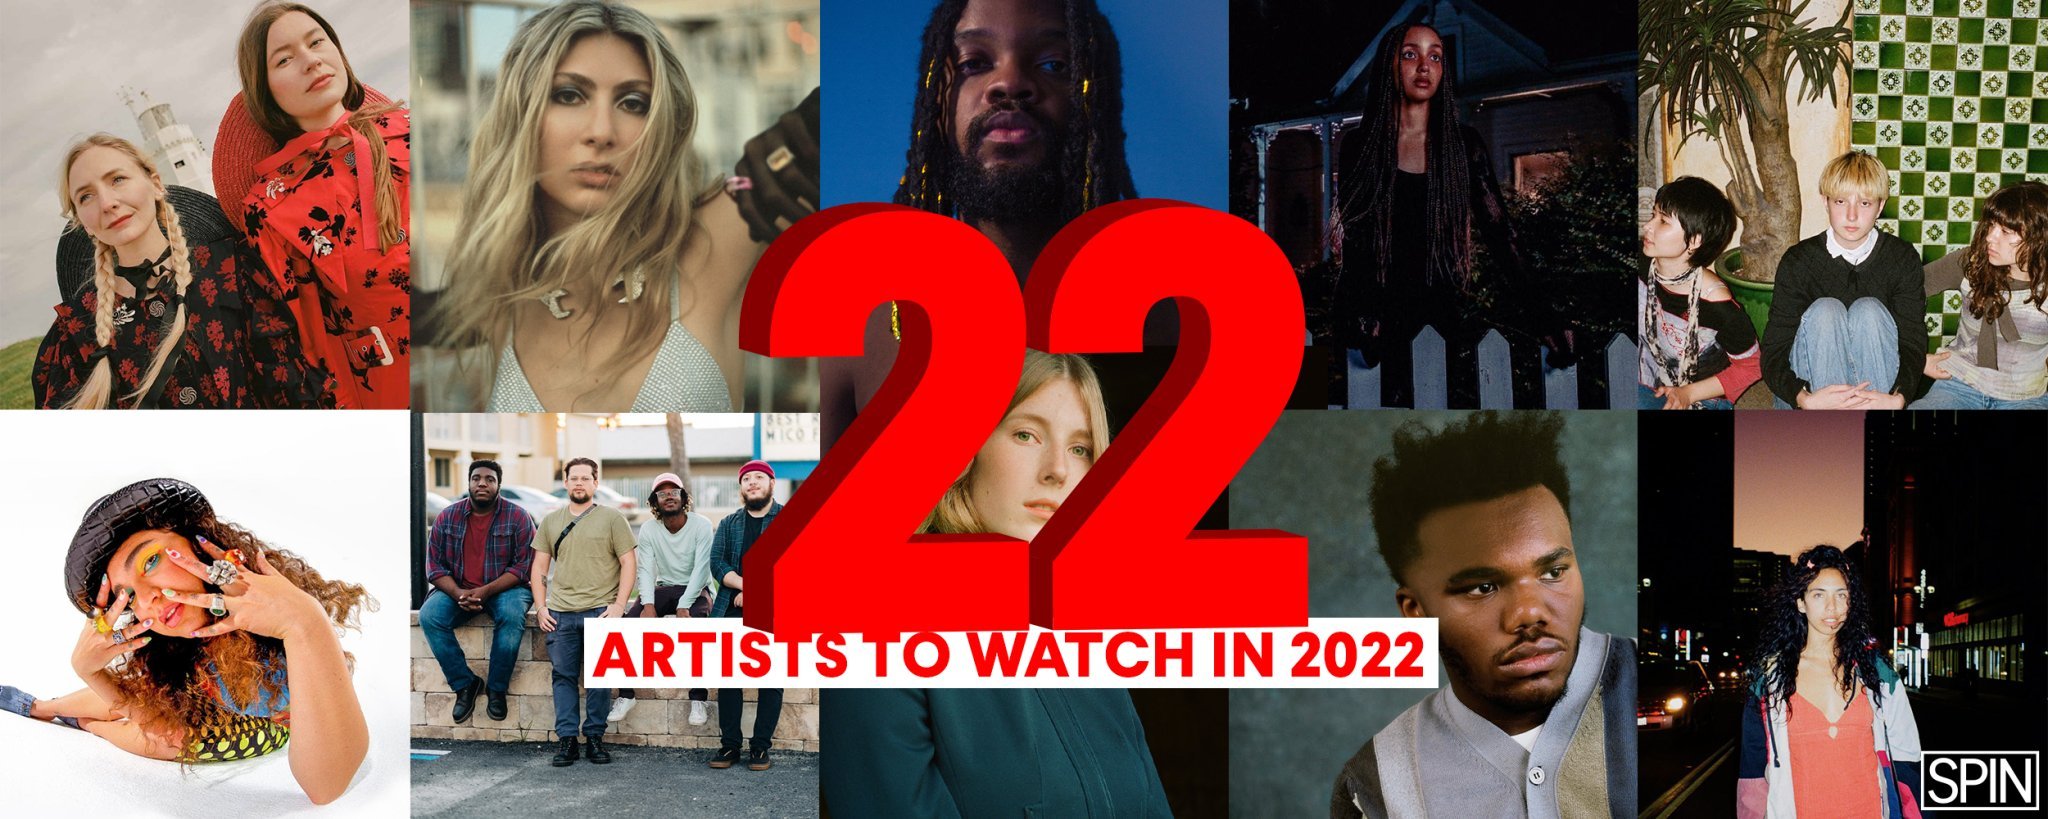 These artists are the future of music